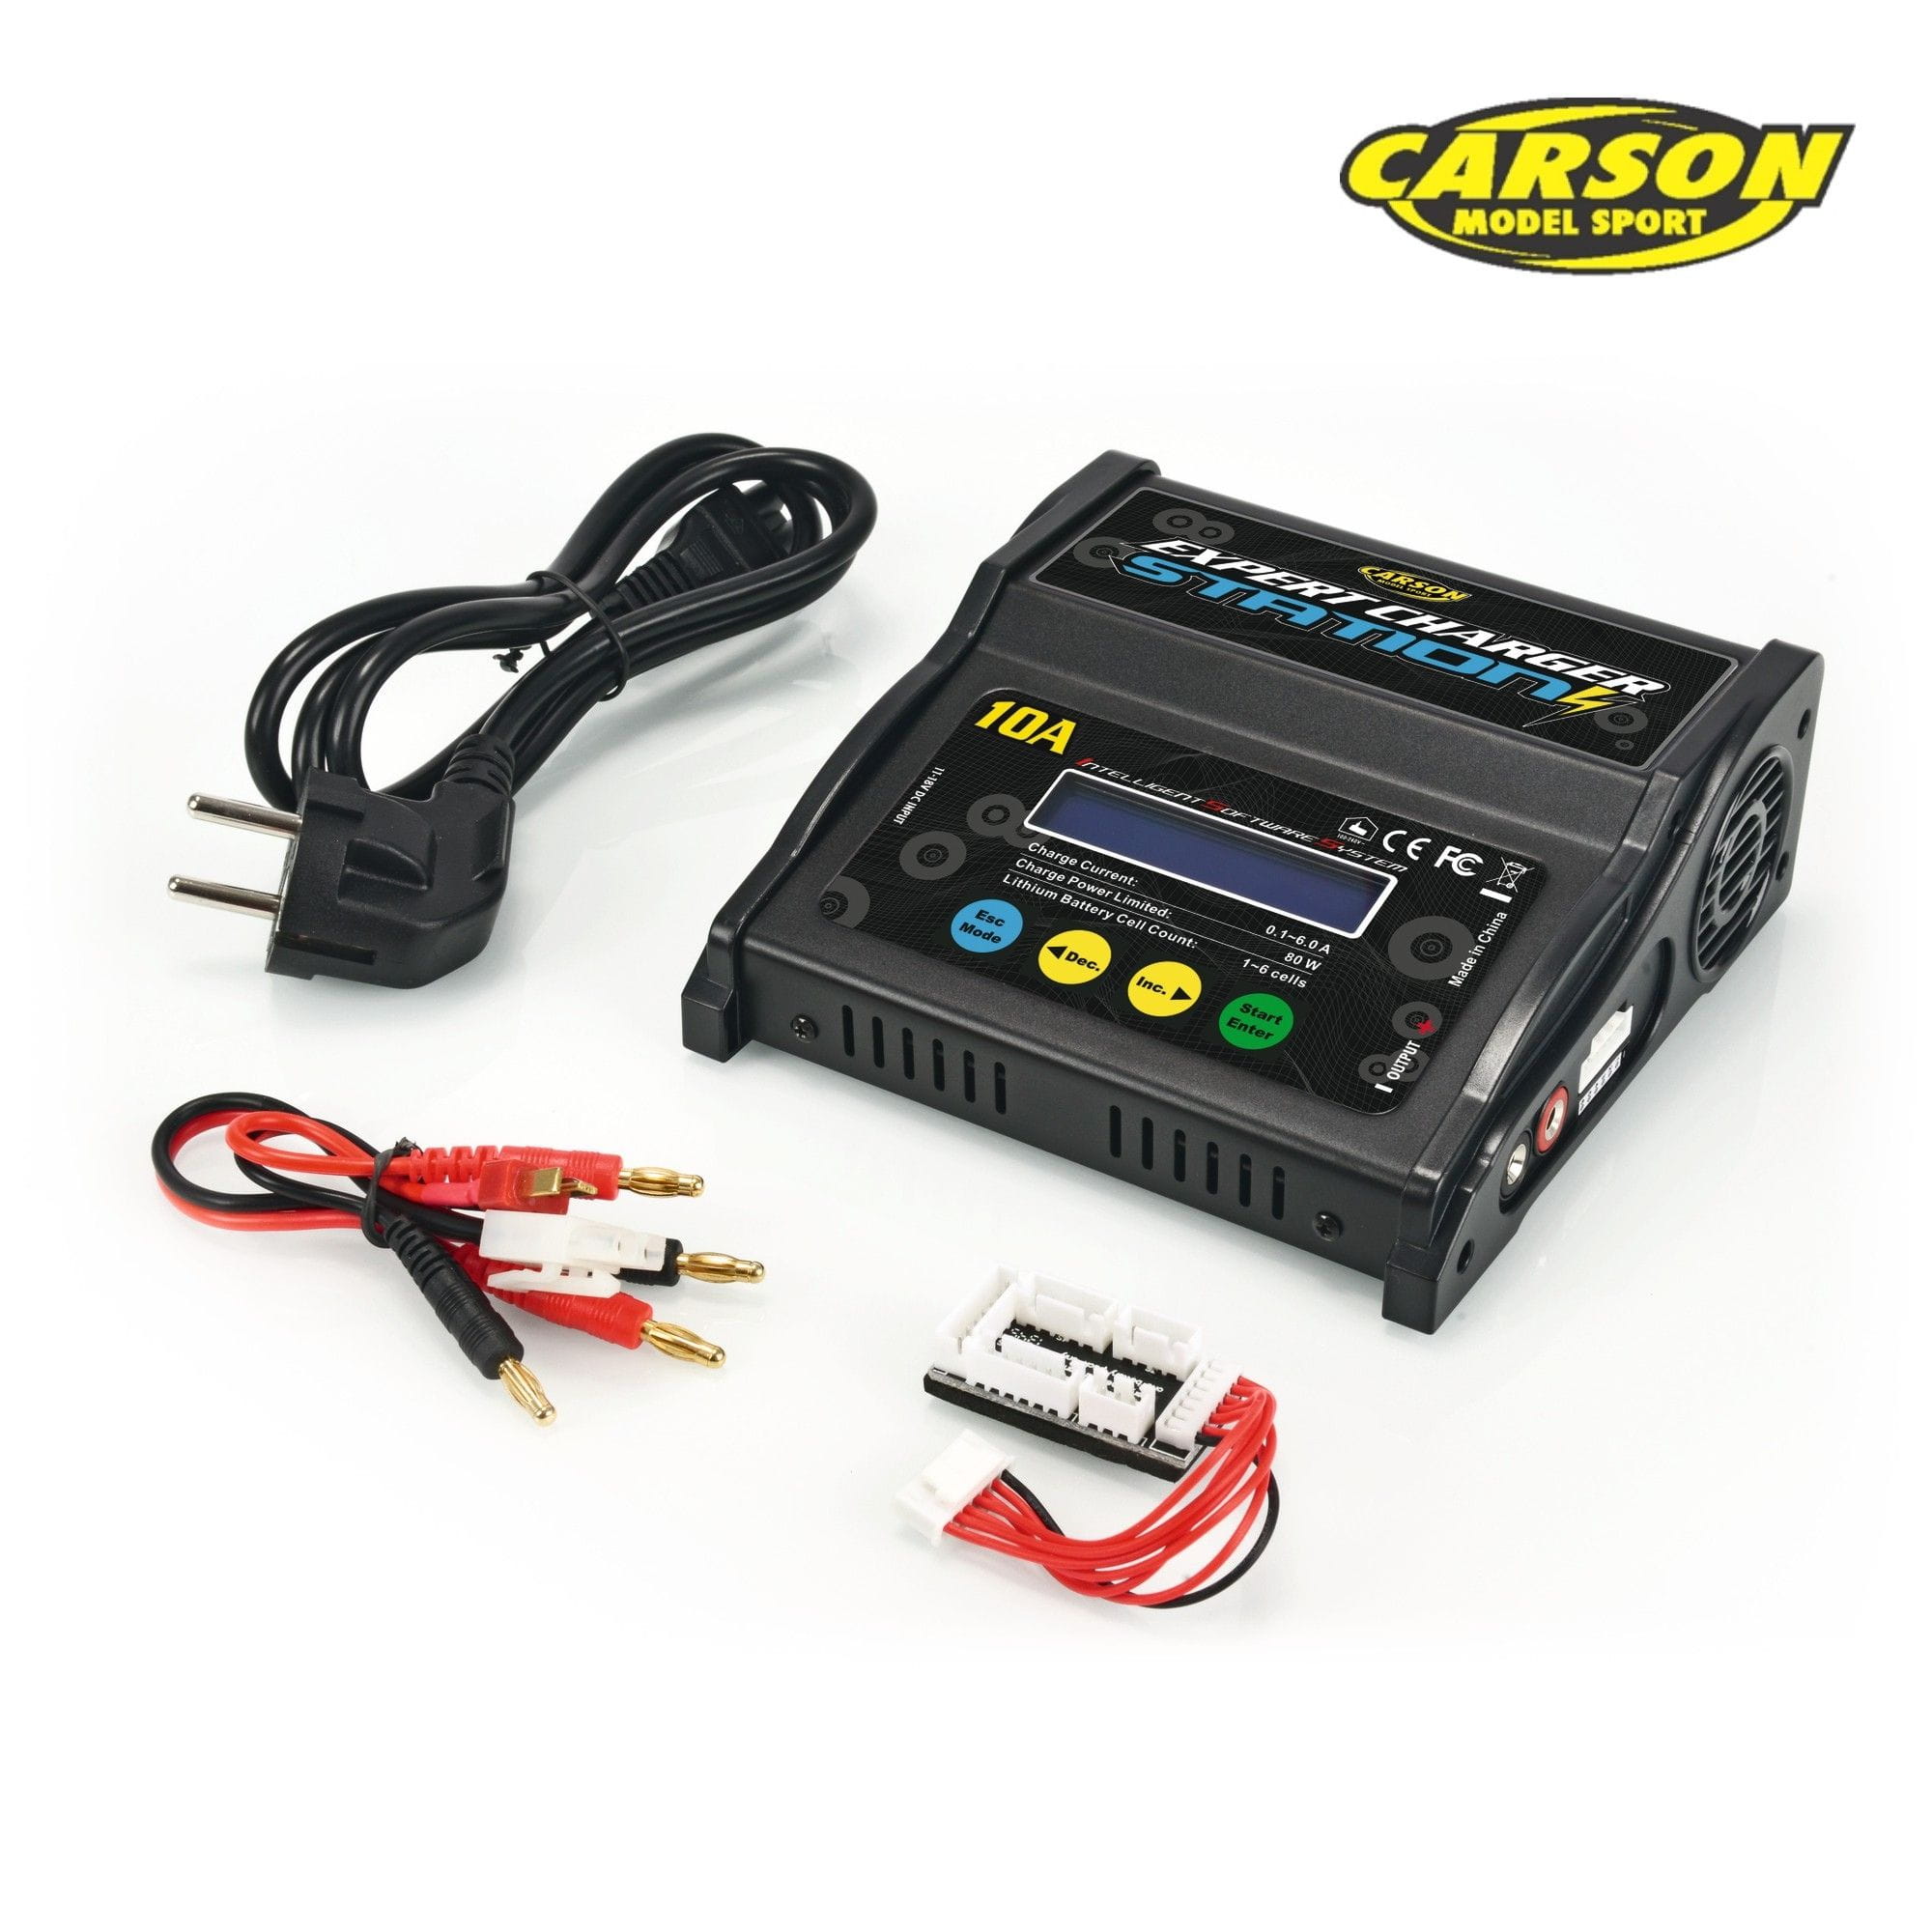 carson expert charger station